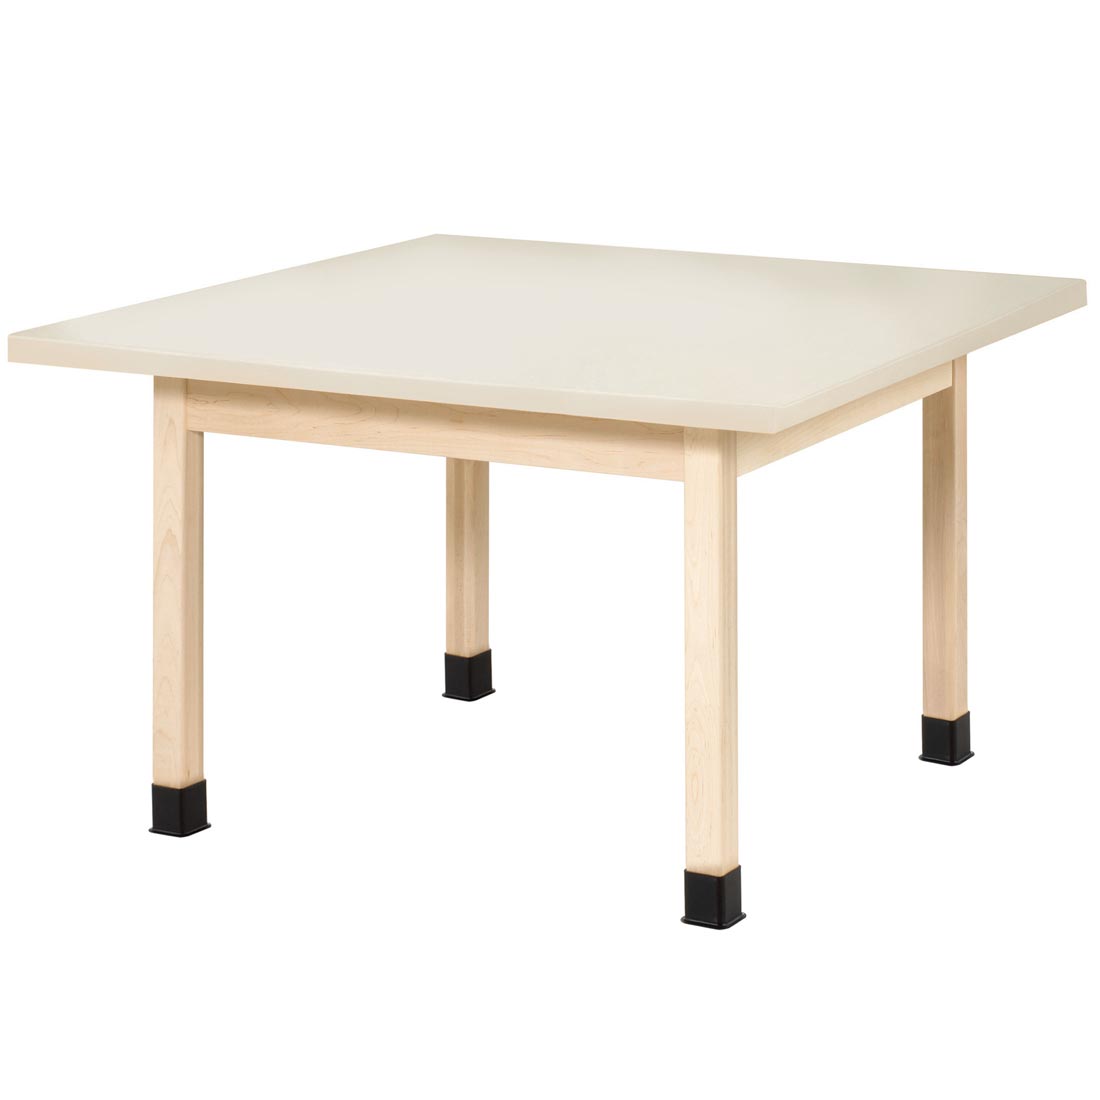 Classic Worktop Table with Plastic Laminate Top